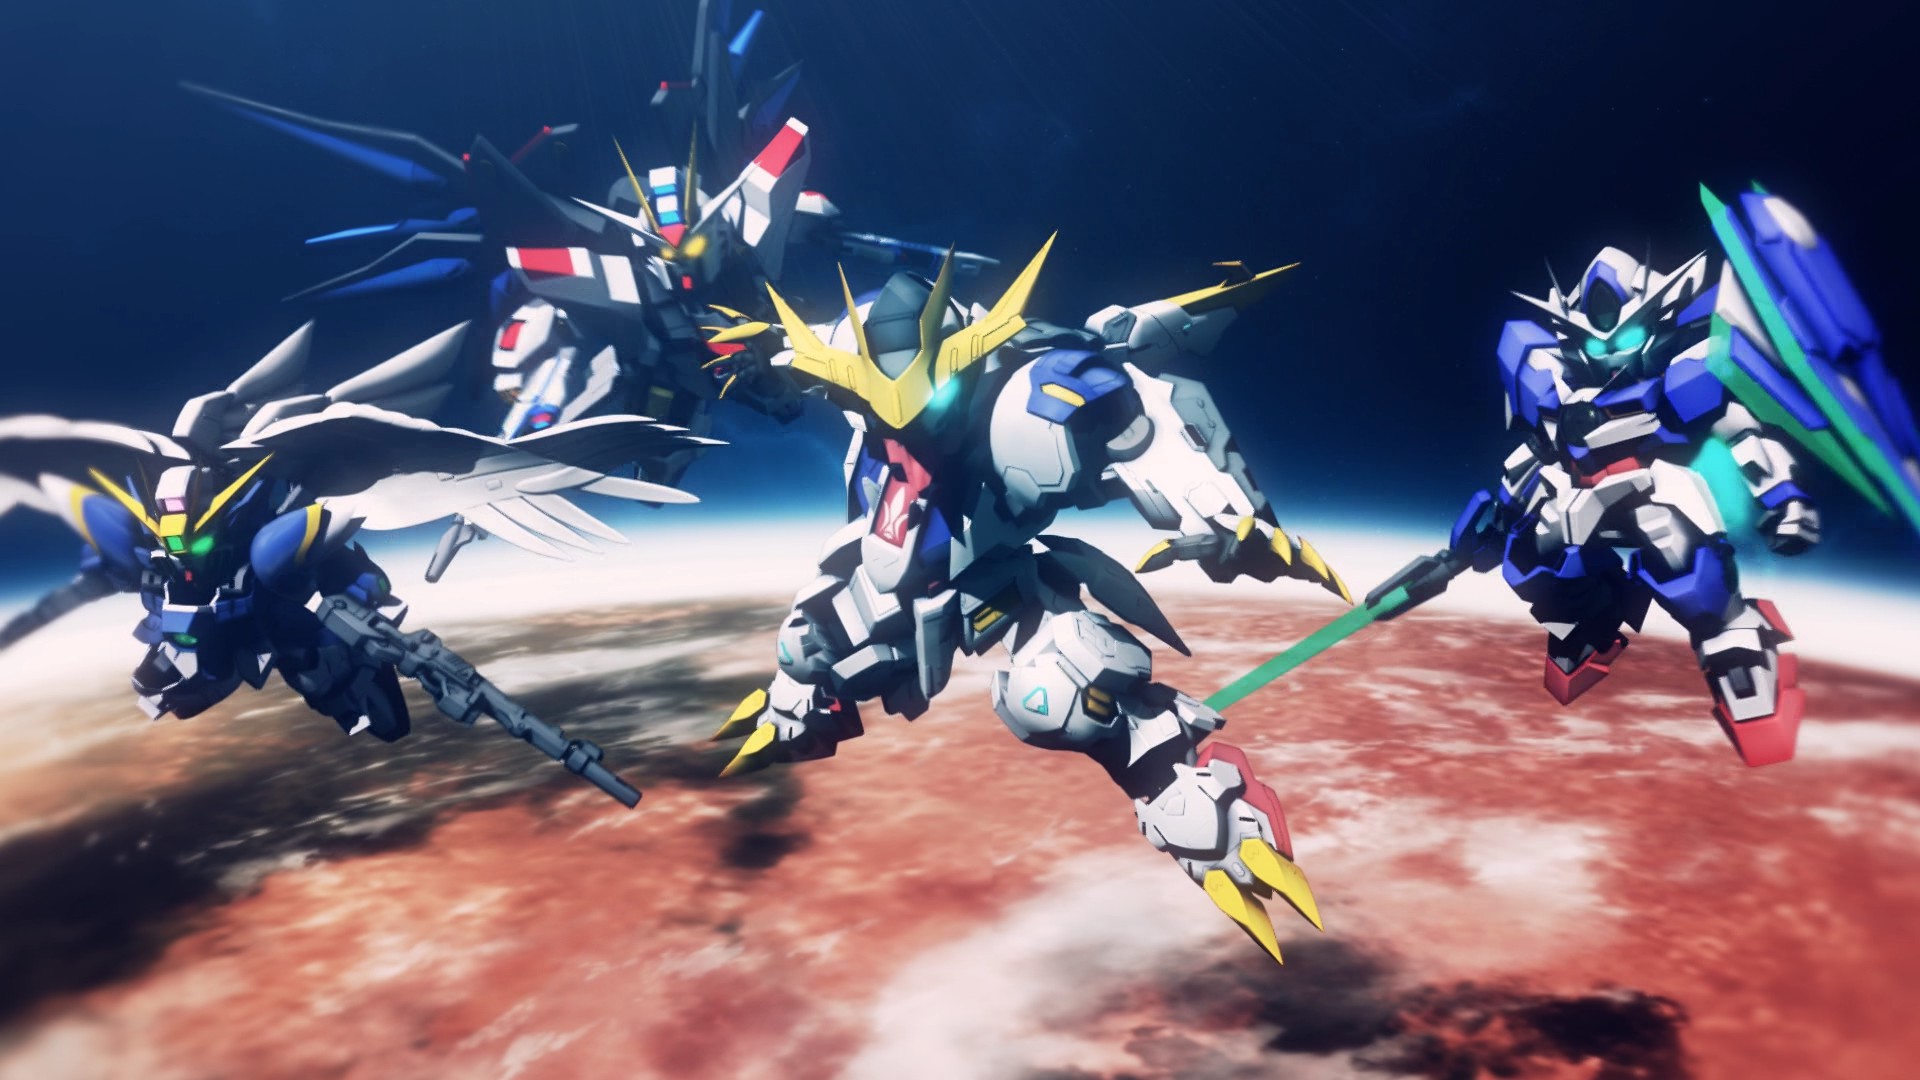 Sd Gundam G Generation Cross Rays Review Irrational Passions